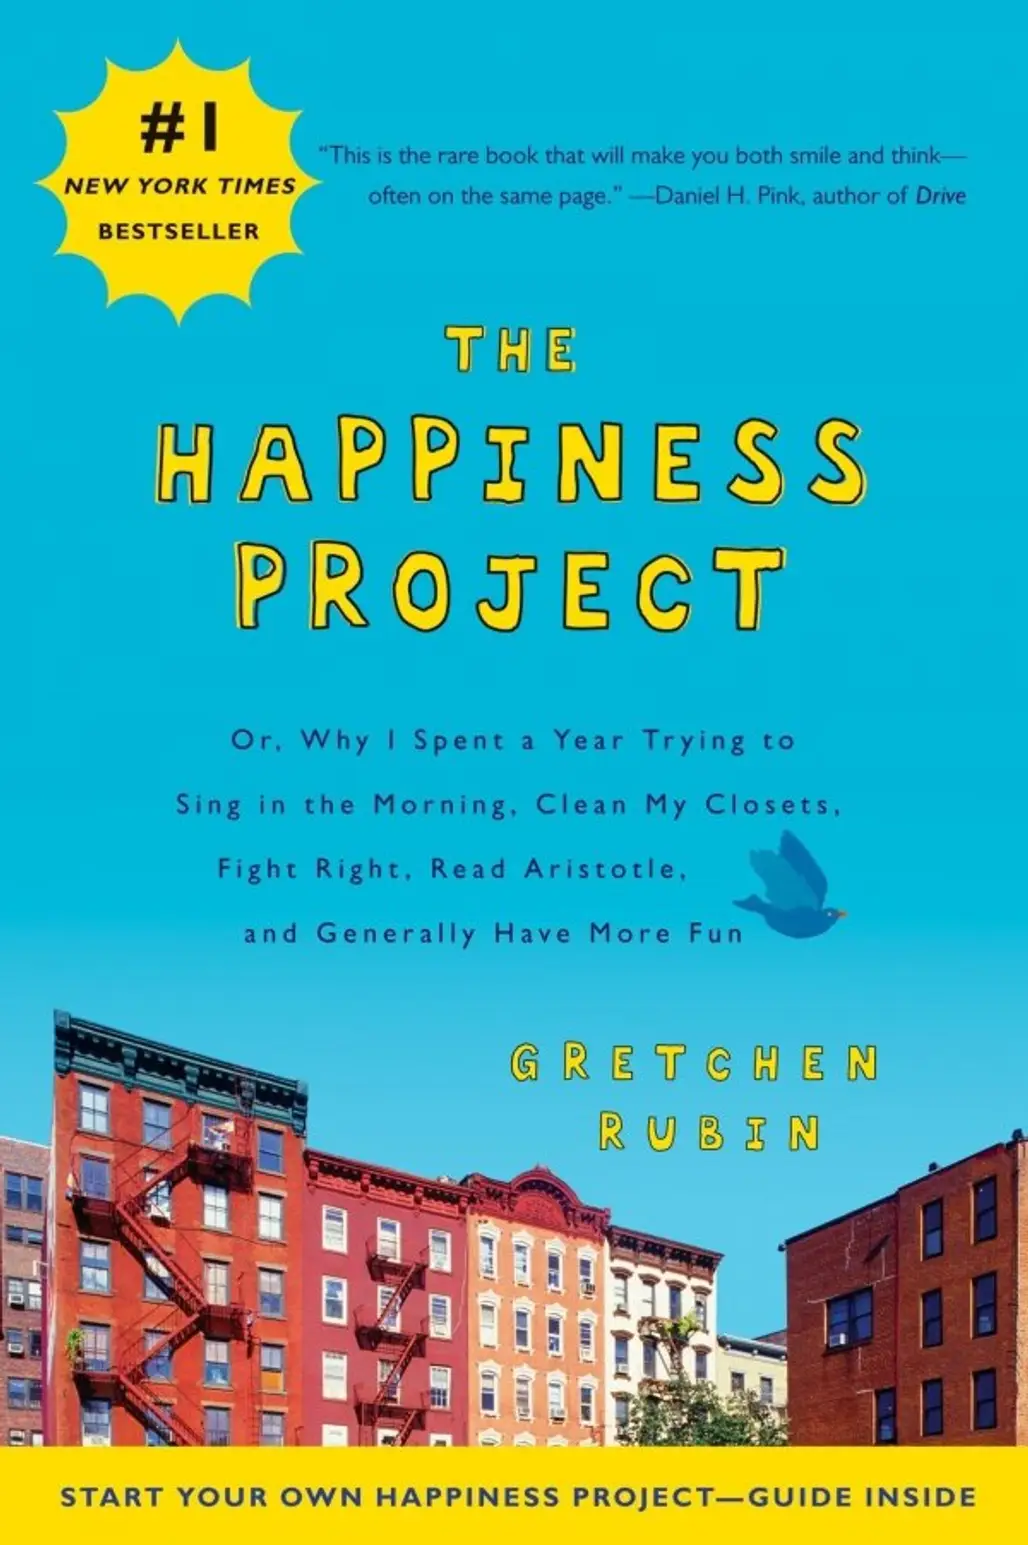 The Happiness Project: or Why I Spent a Year Trying to Sing by Gretchen Rubin